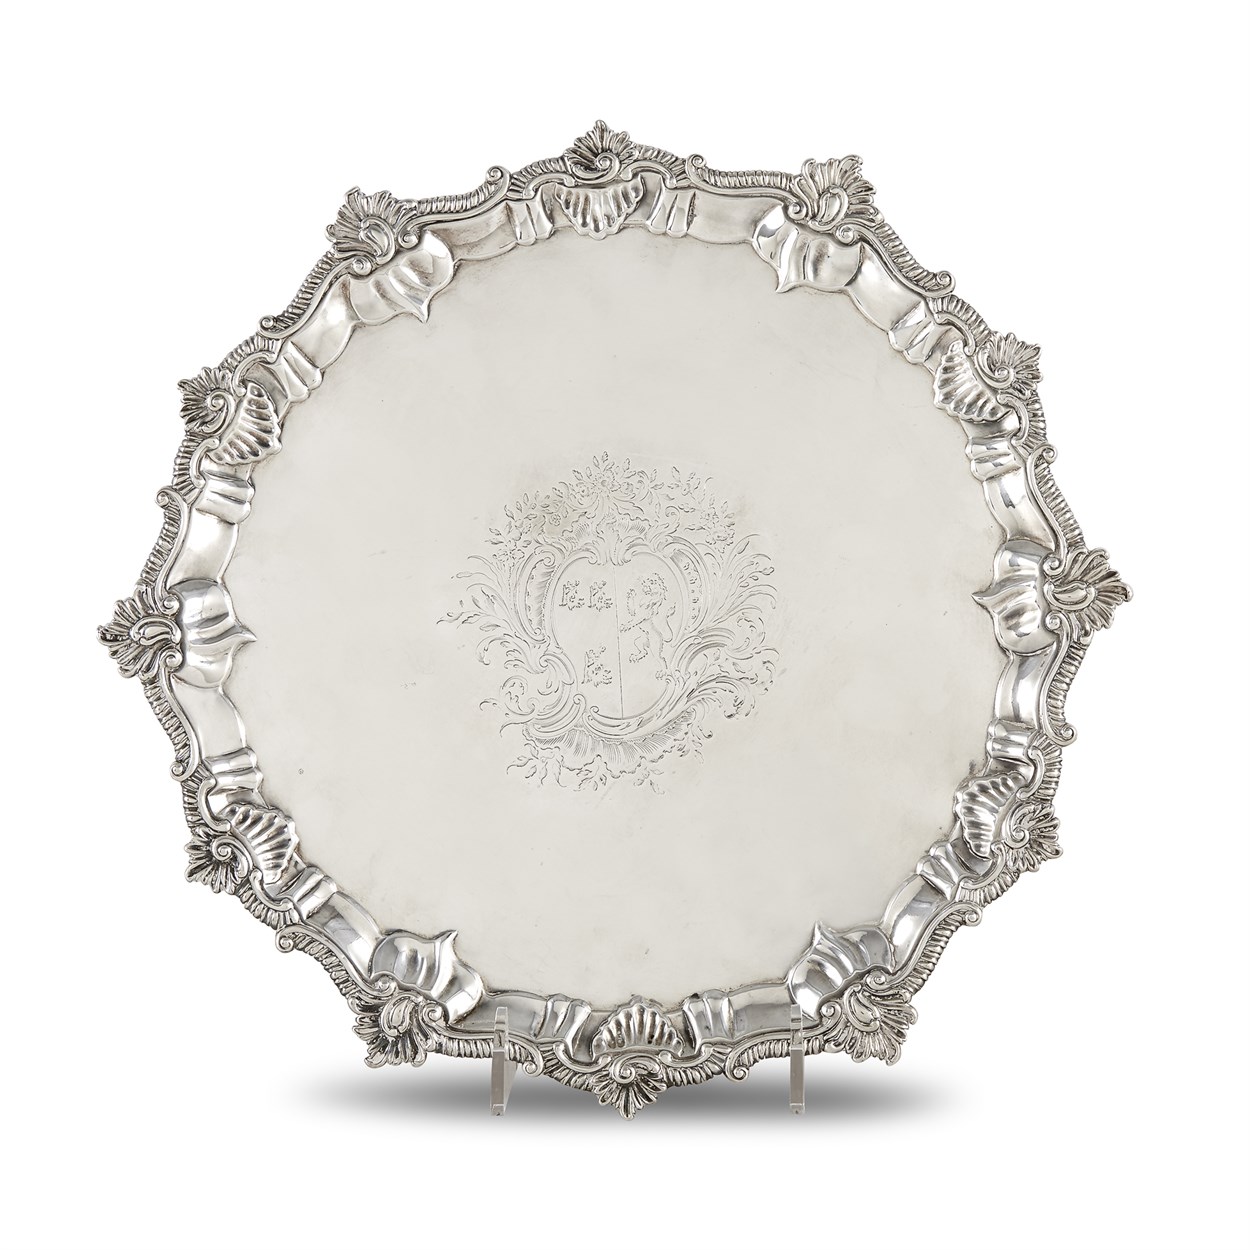 Lot 40 - A George II sterling silver salver